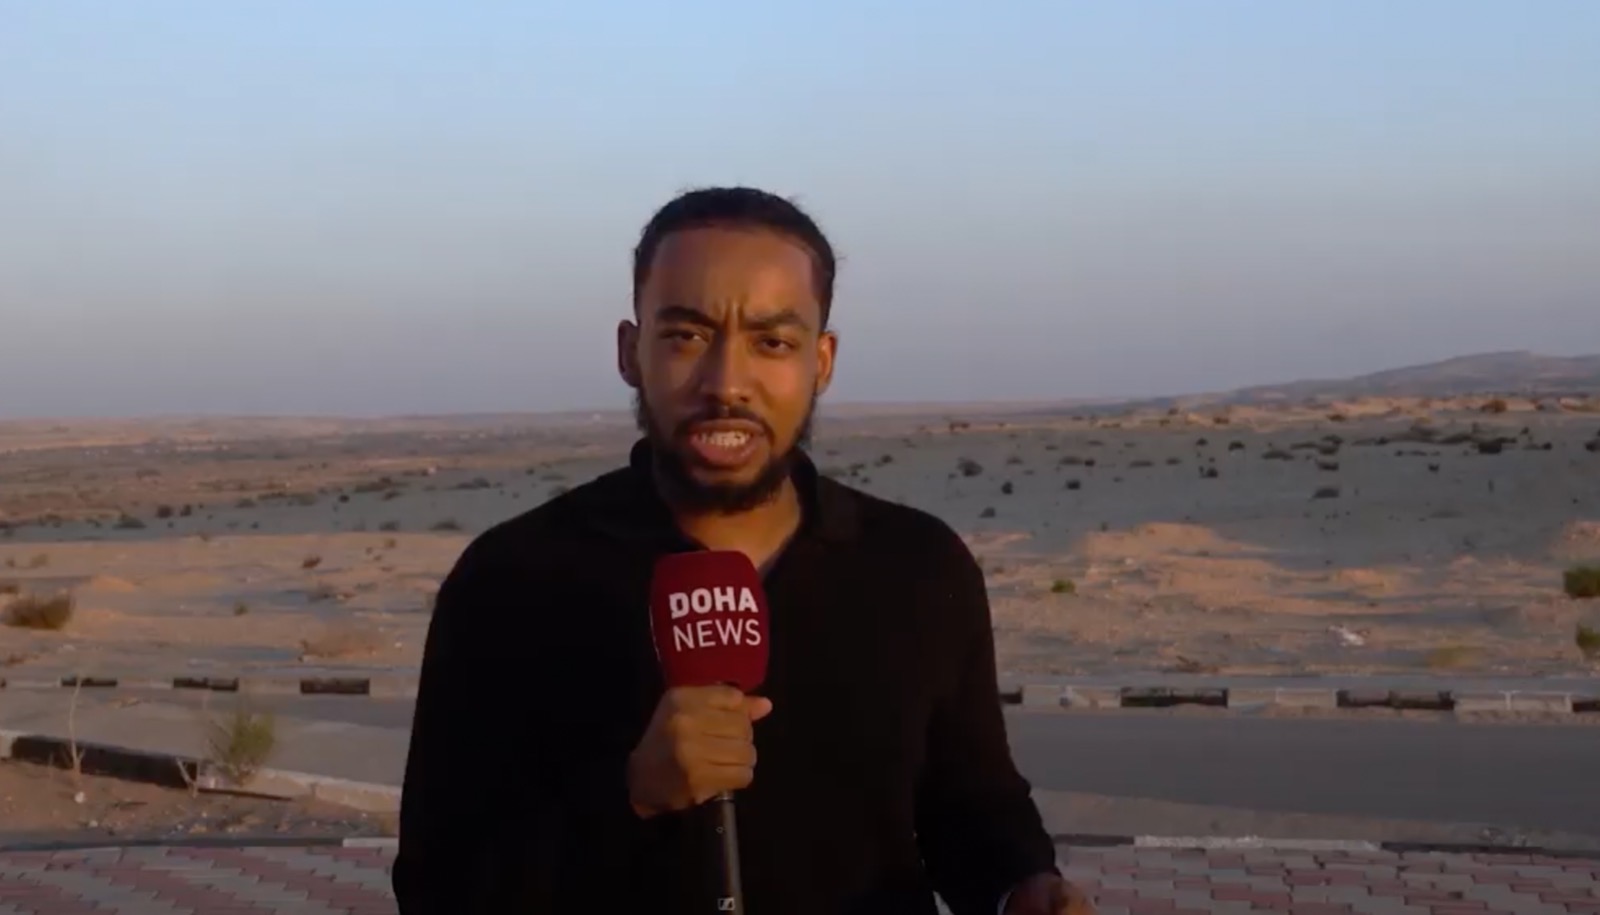 Mohammed Eltayeb ‘20 has been reporting on Morocco’s deadly earthquake for Doha News, documenting stories of hope amid the challenges of rebuilding